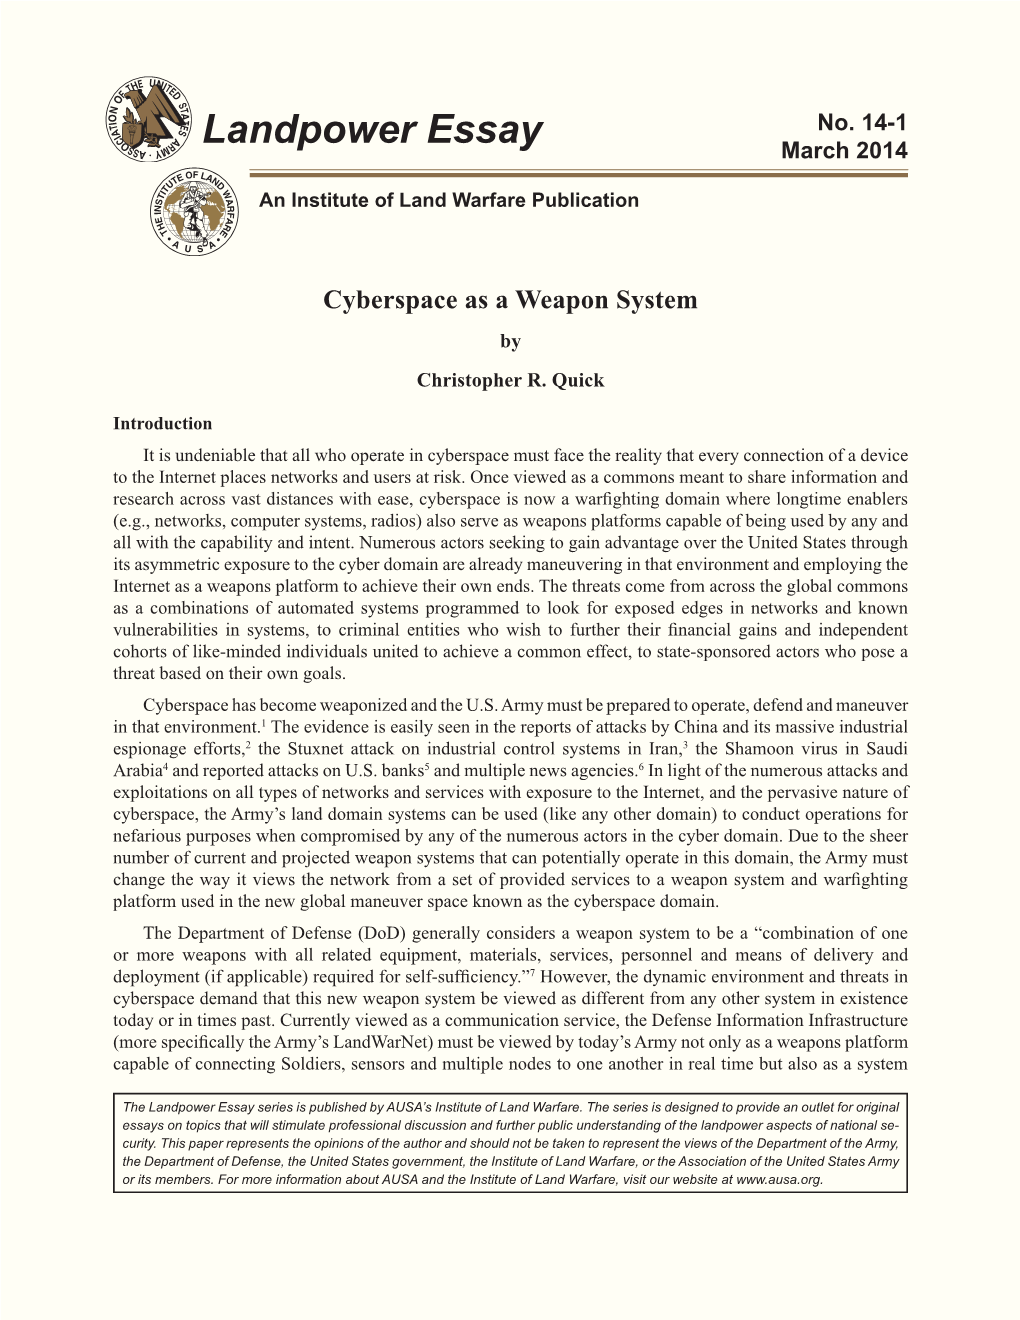 Cyberspace As a Weapon System by Christopher R